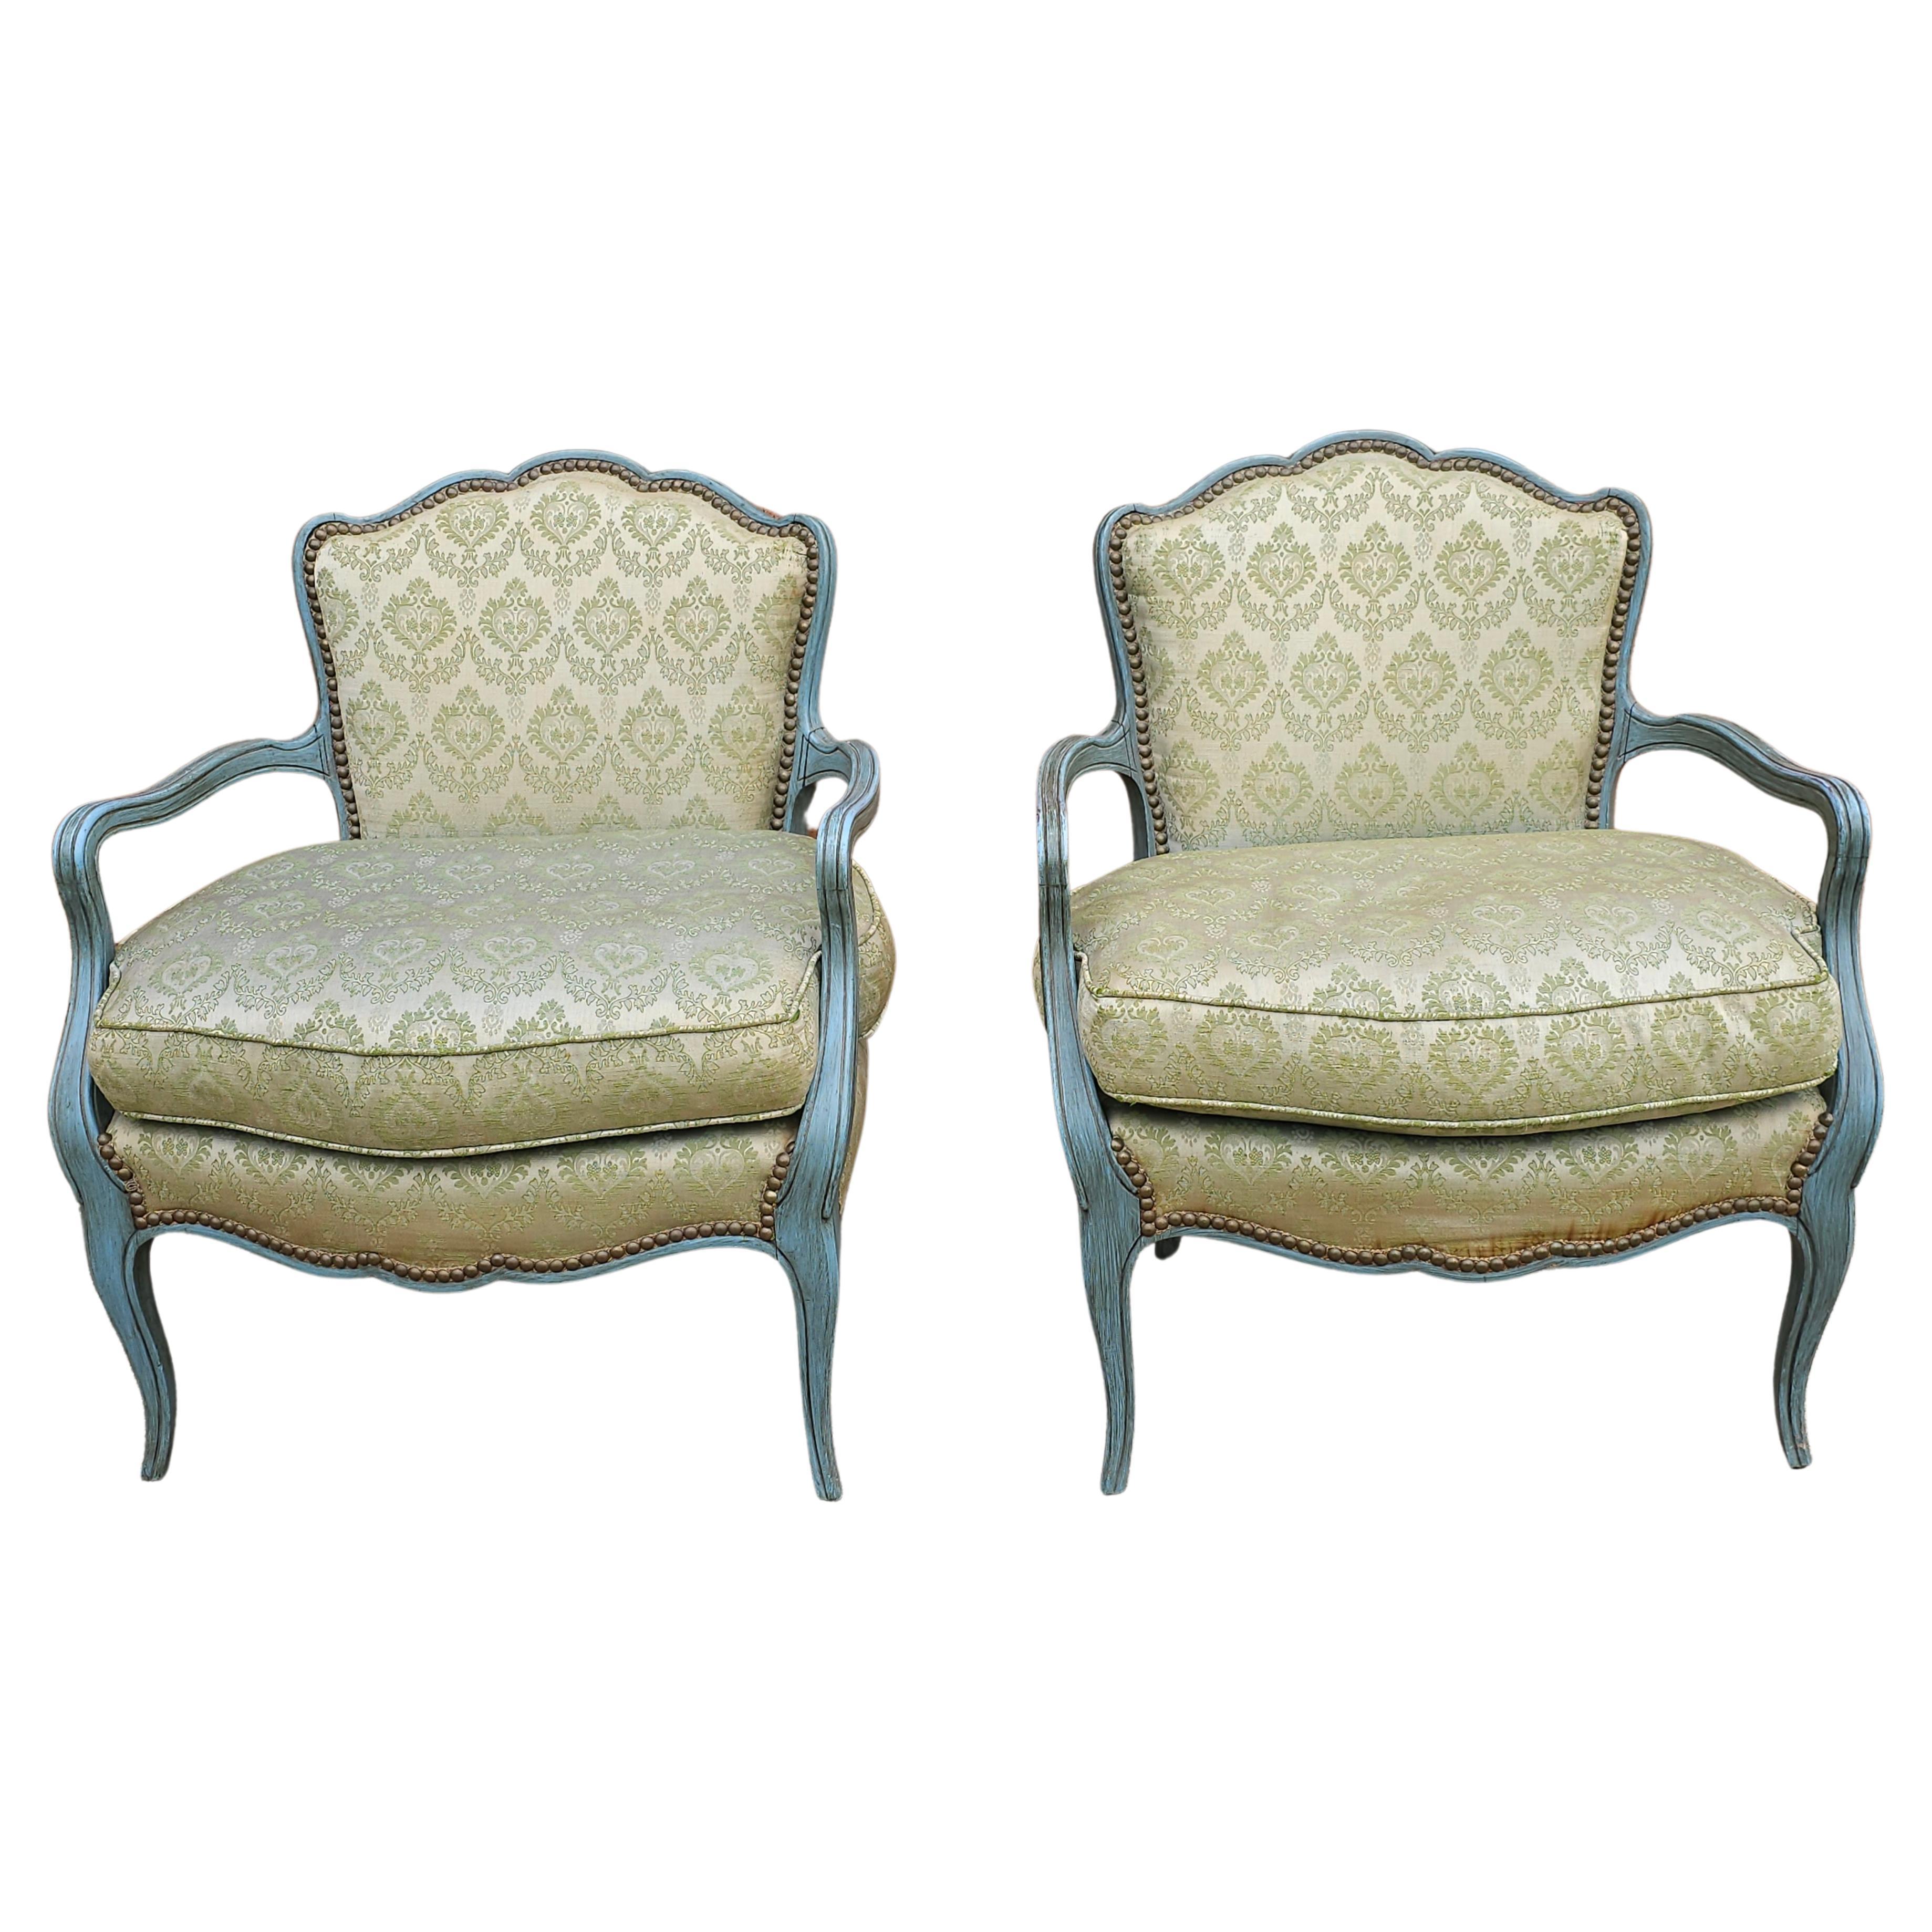 Pair French Provincial Green Painted And Upholstered Low Fauteuils / Bergeres For Sale